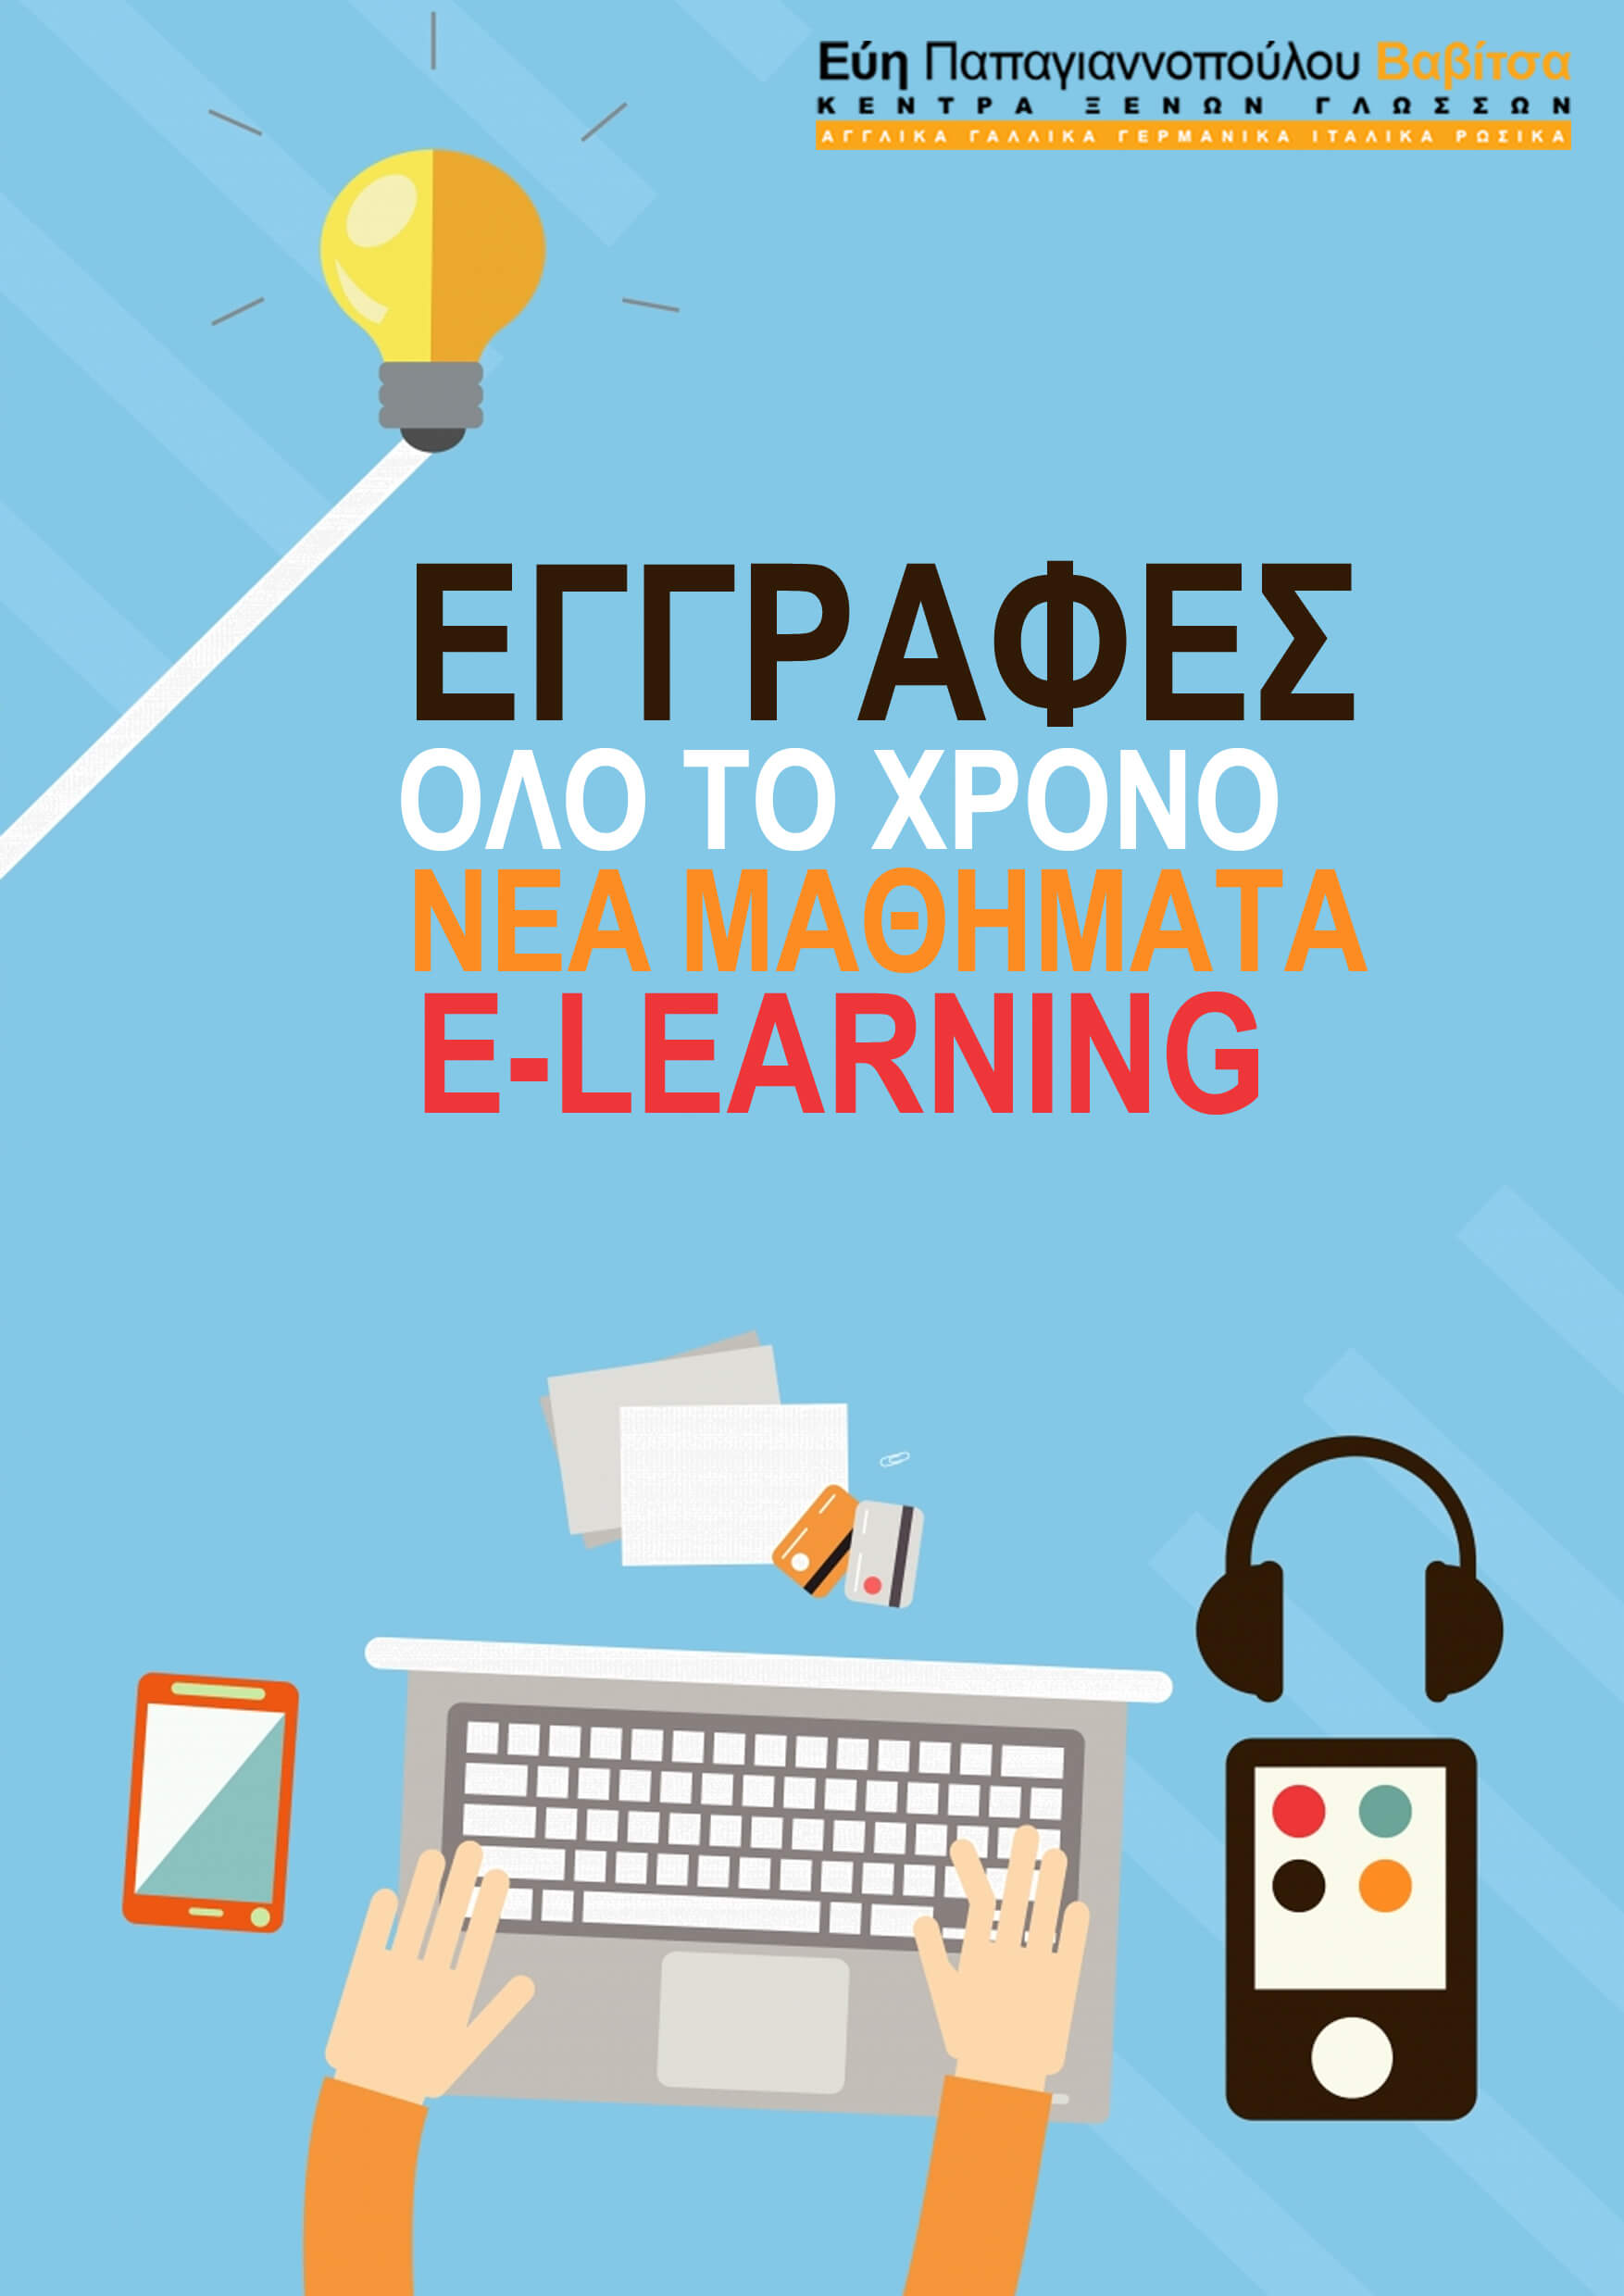 E LEARNING POSTER A3 2019